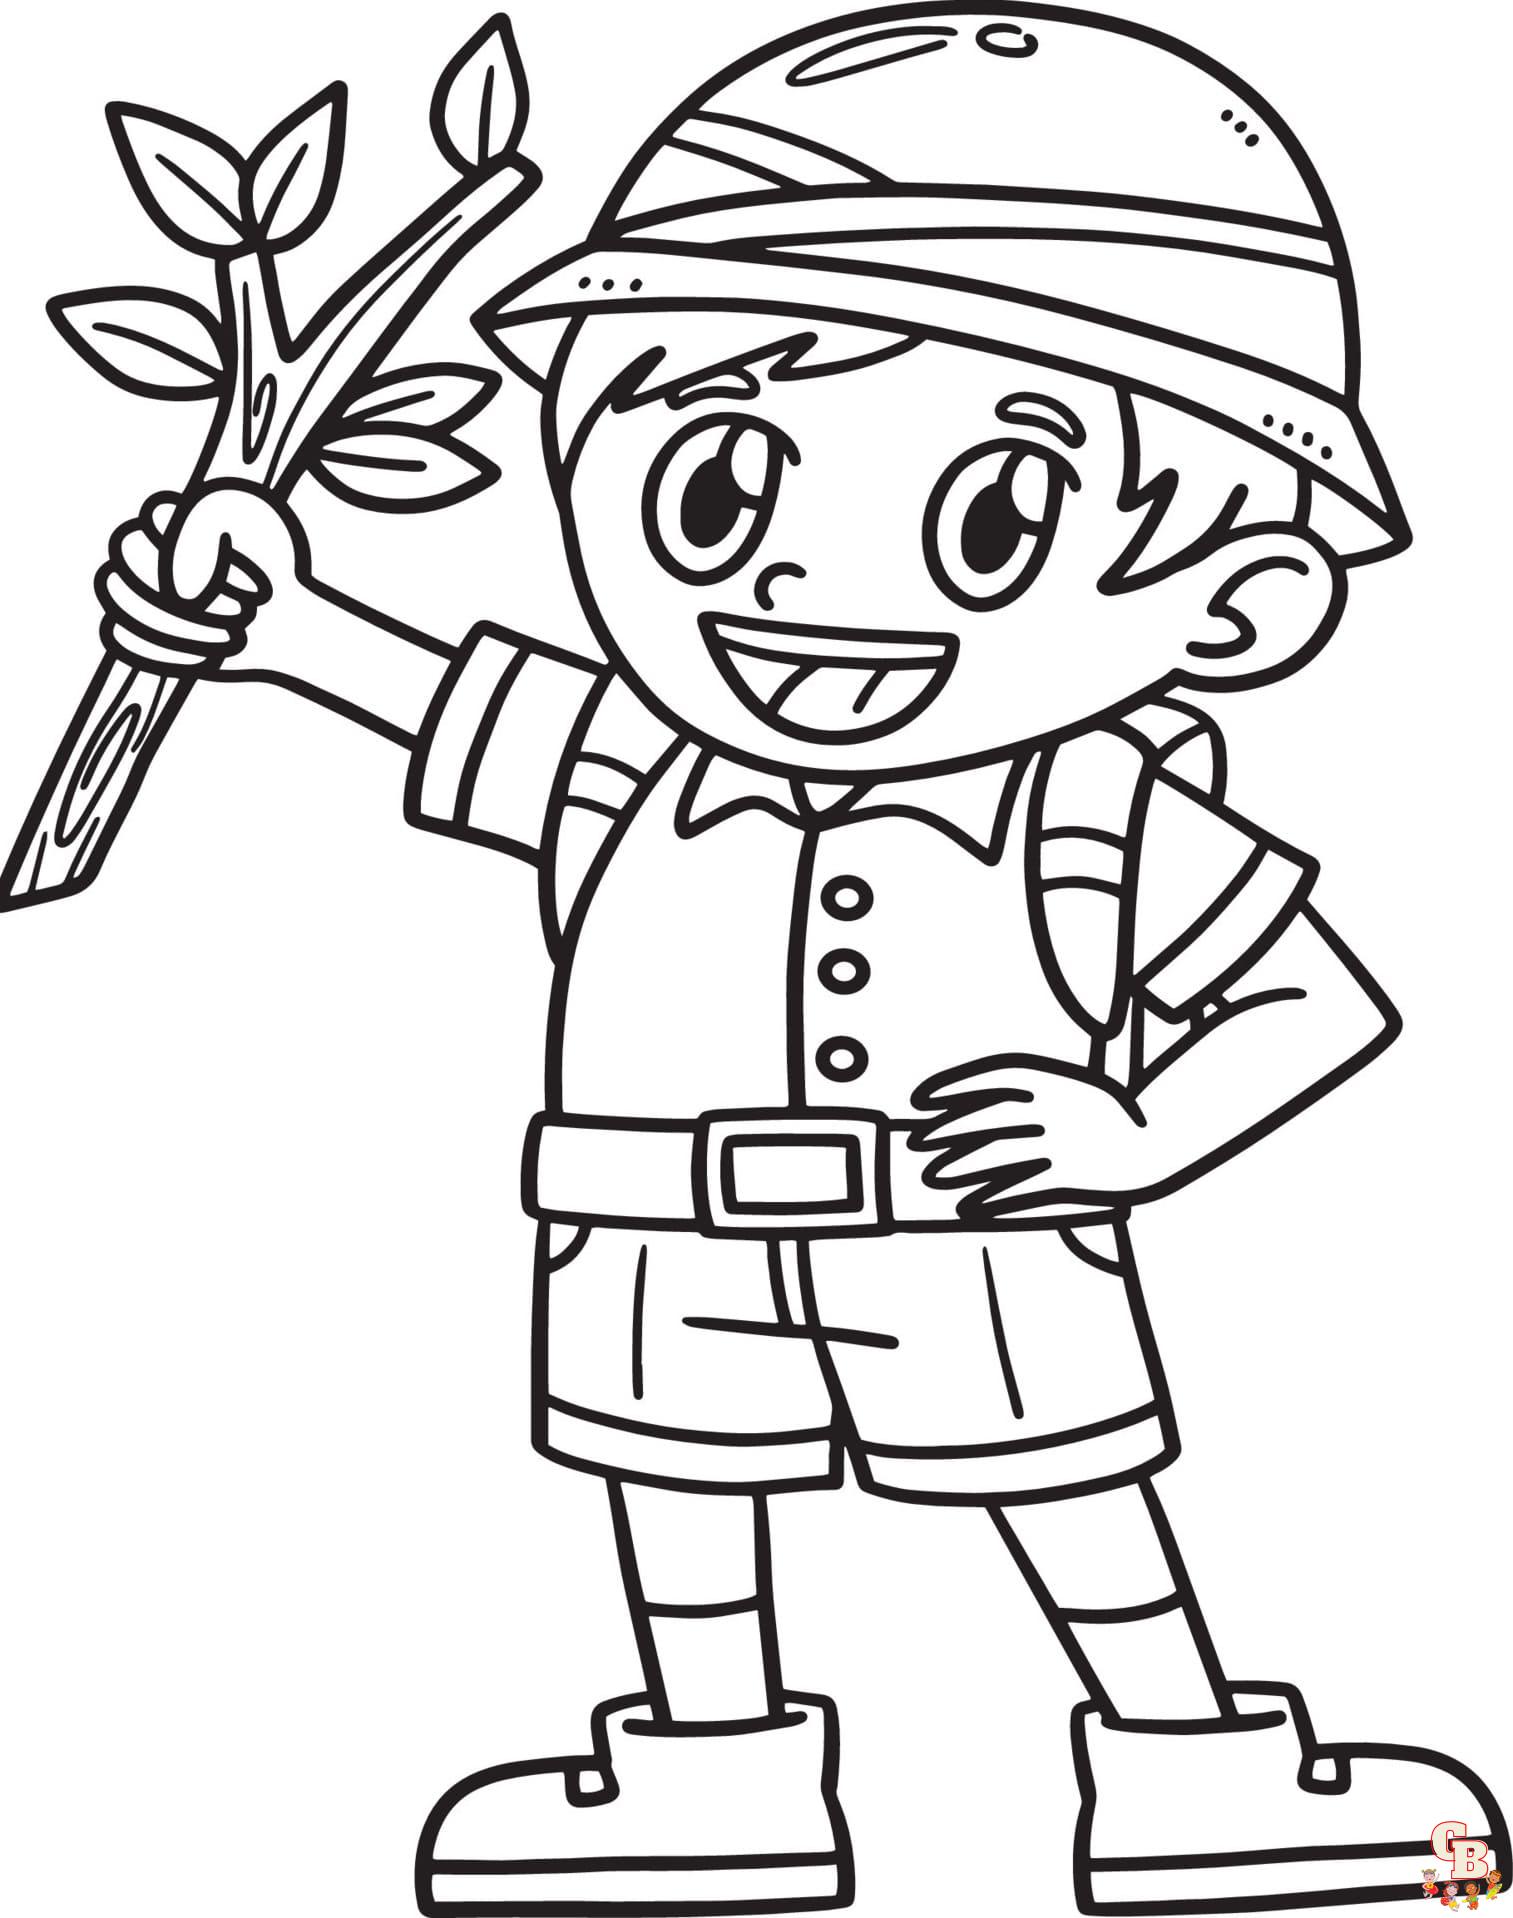 Cub Scout coloring pages printable